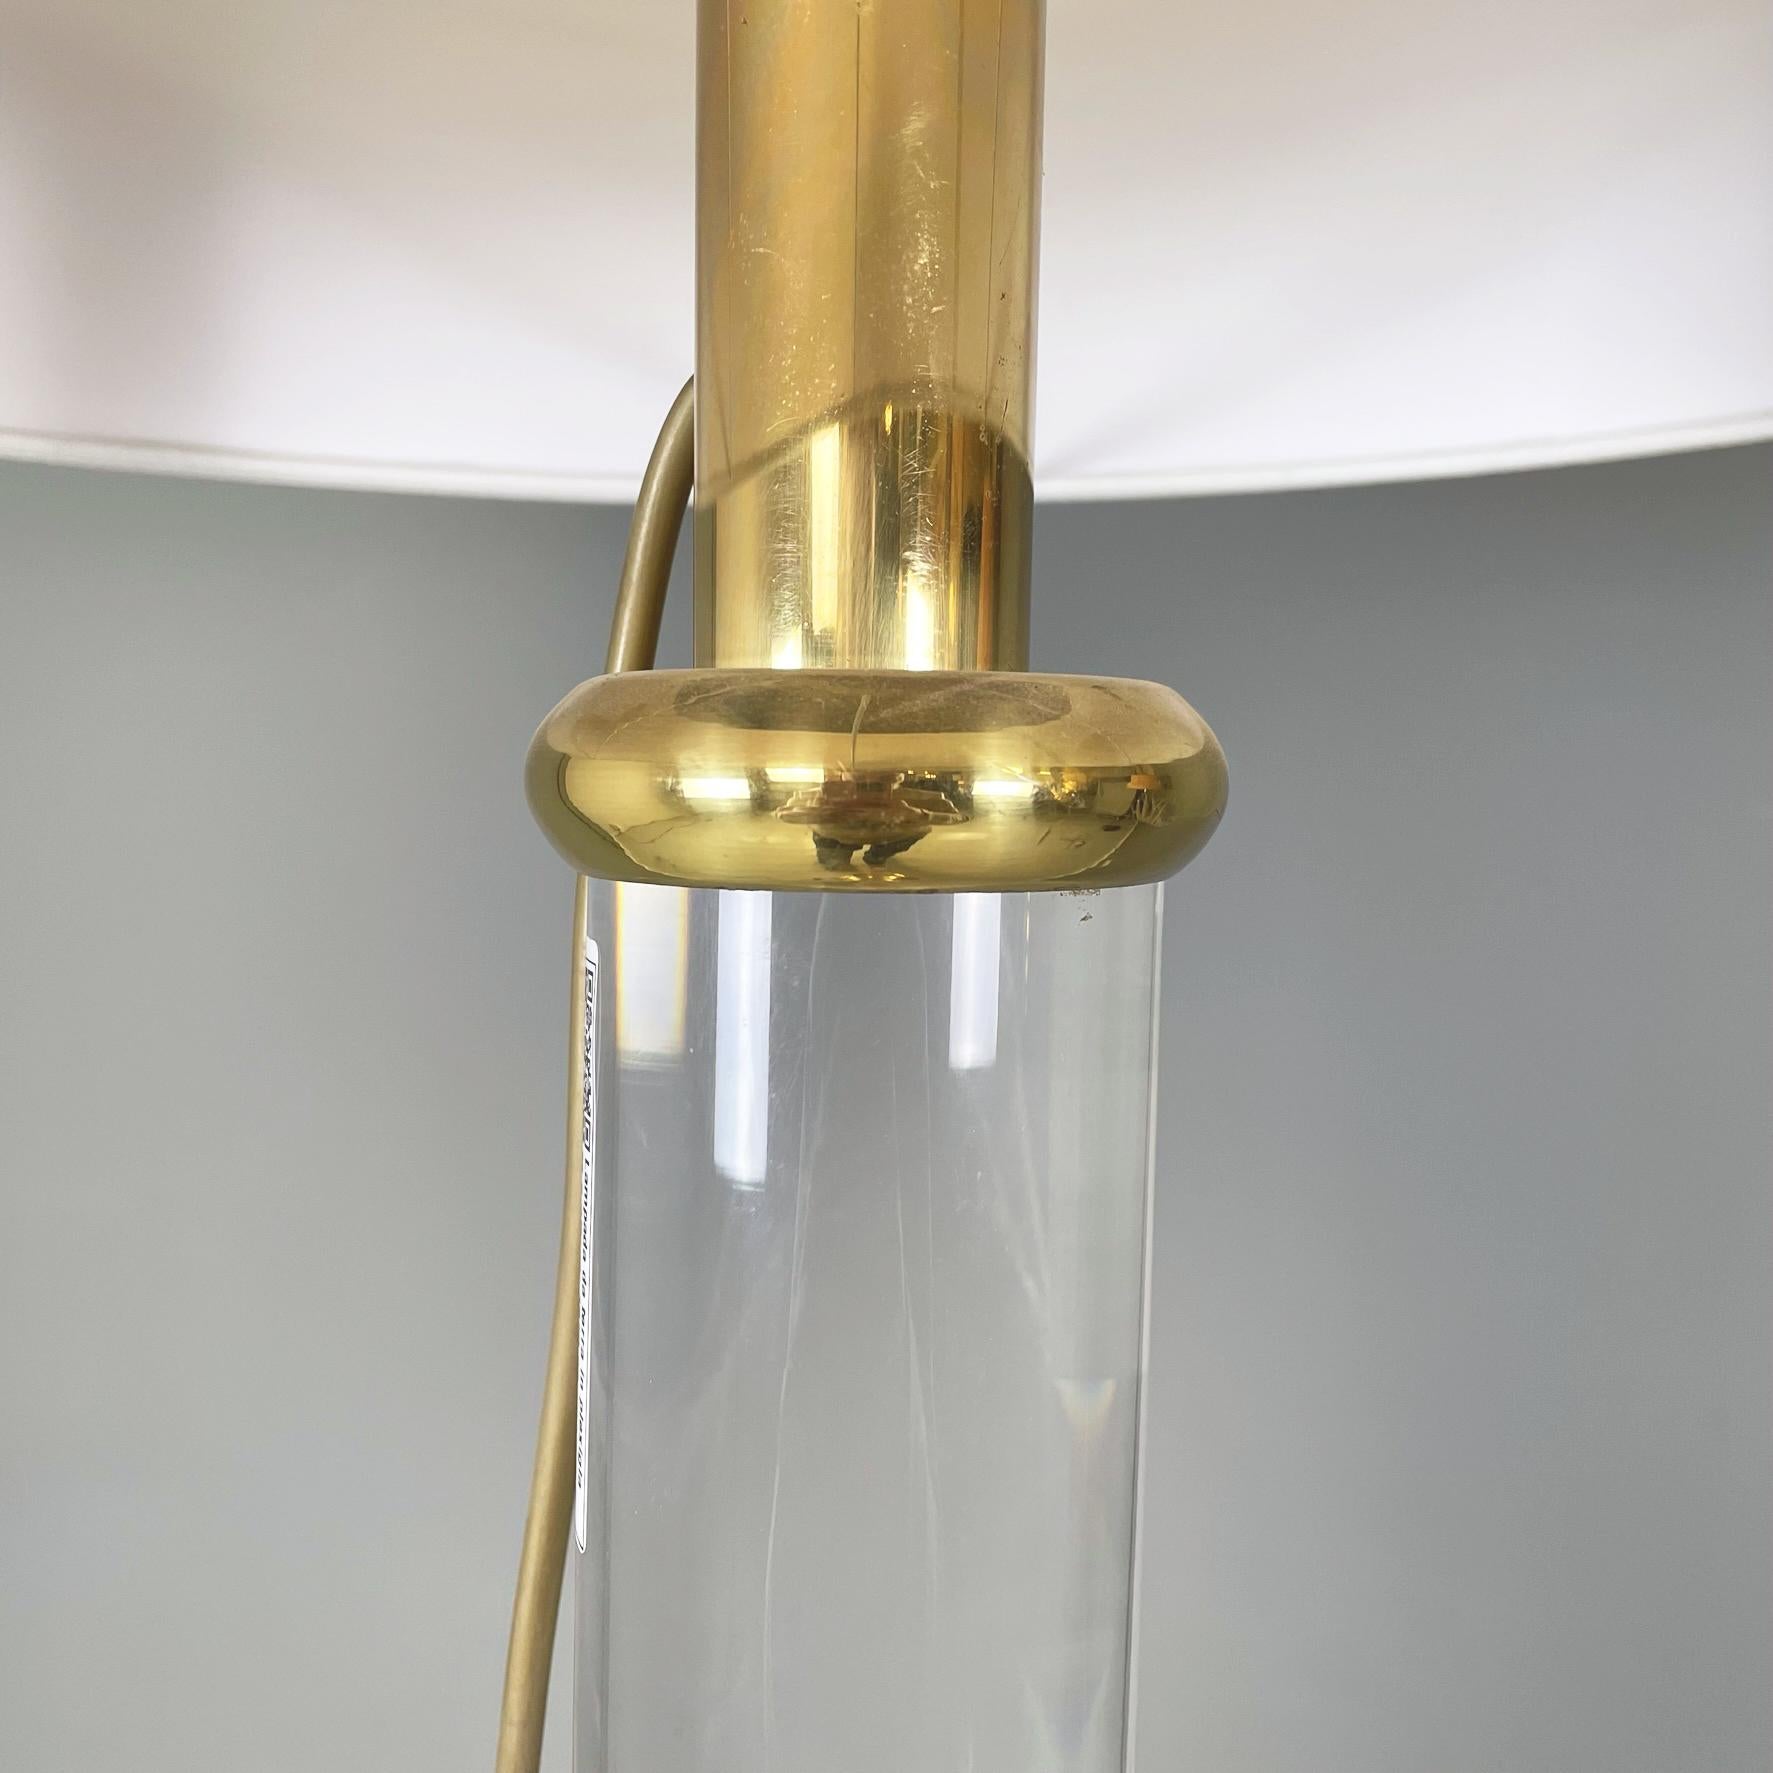 Italian Modern Floor Lamp in White Fabric Lampshade, Plexiglass and Brass, 1980s For Sale 4